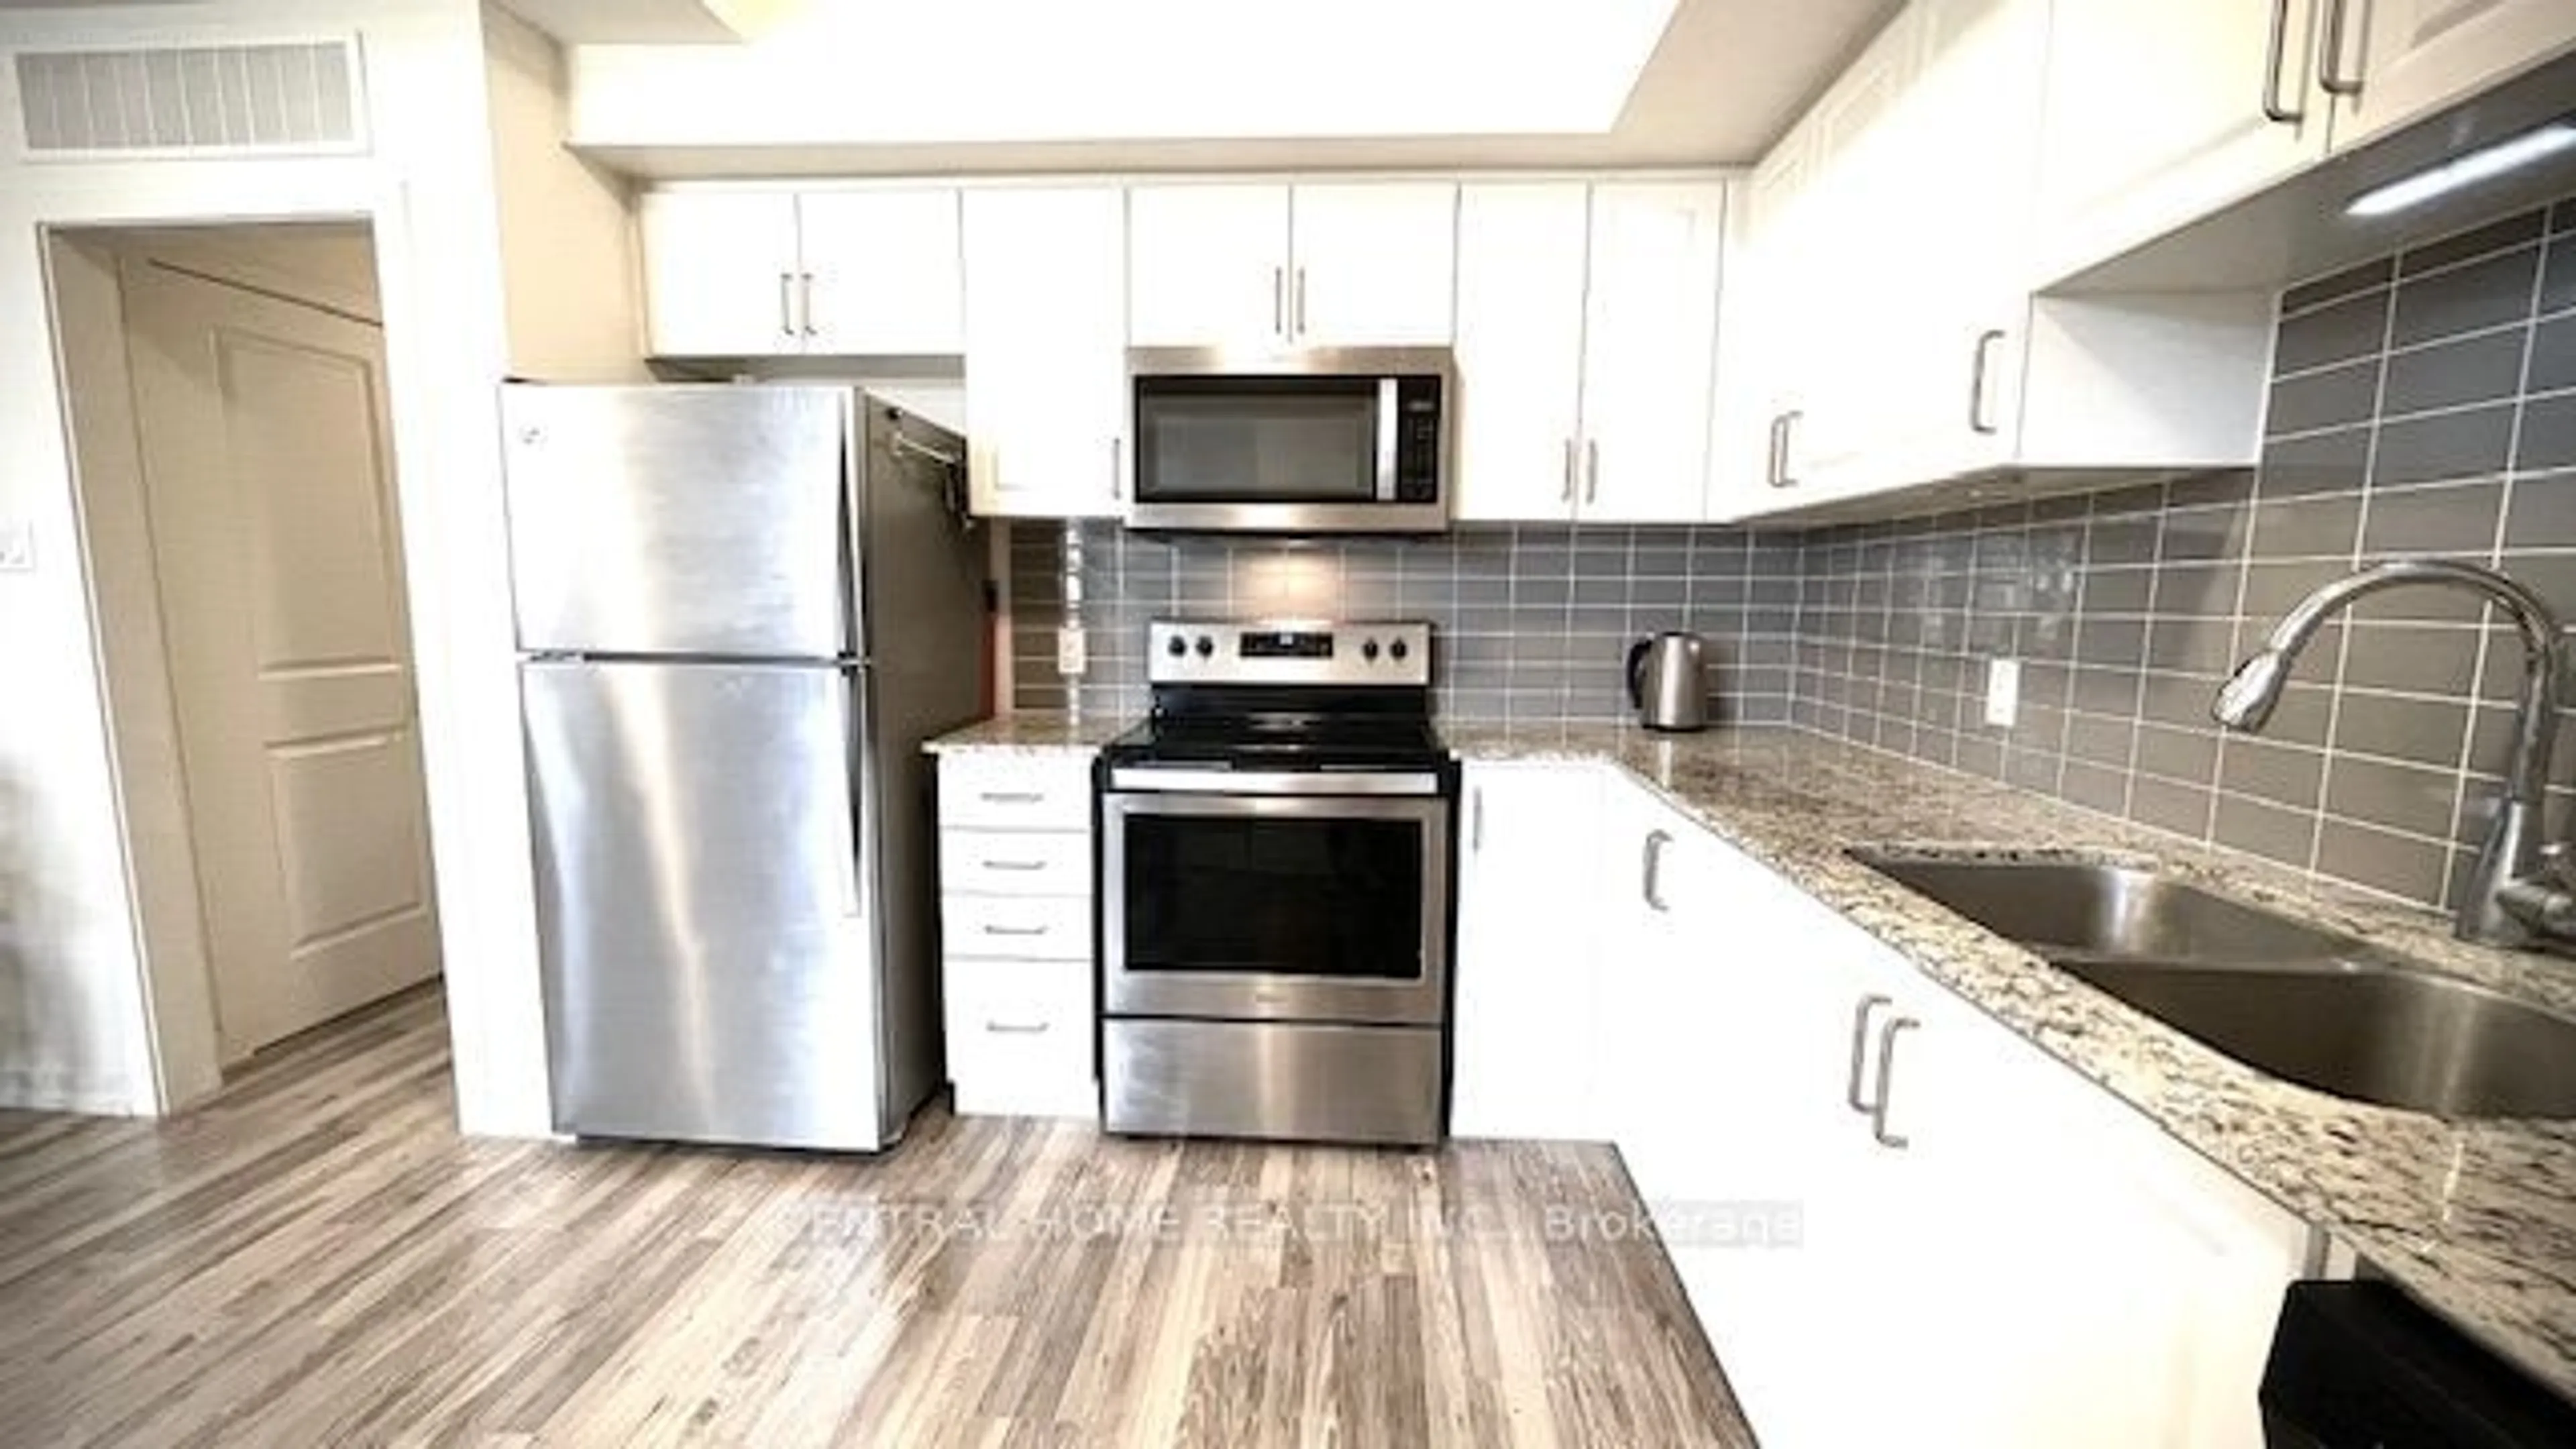 Standard kitchen for 19 Bellcastle Gate #137, Whitchurch-Stouffville Ontario L4A 4T4